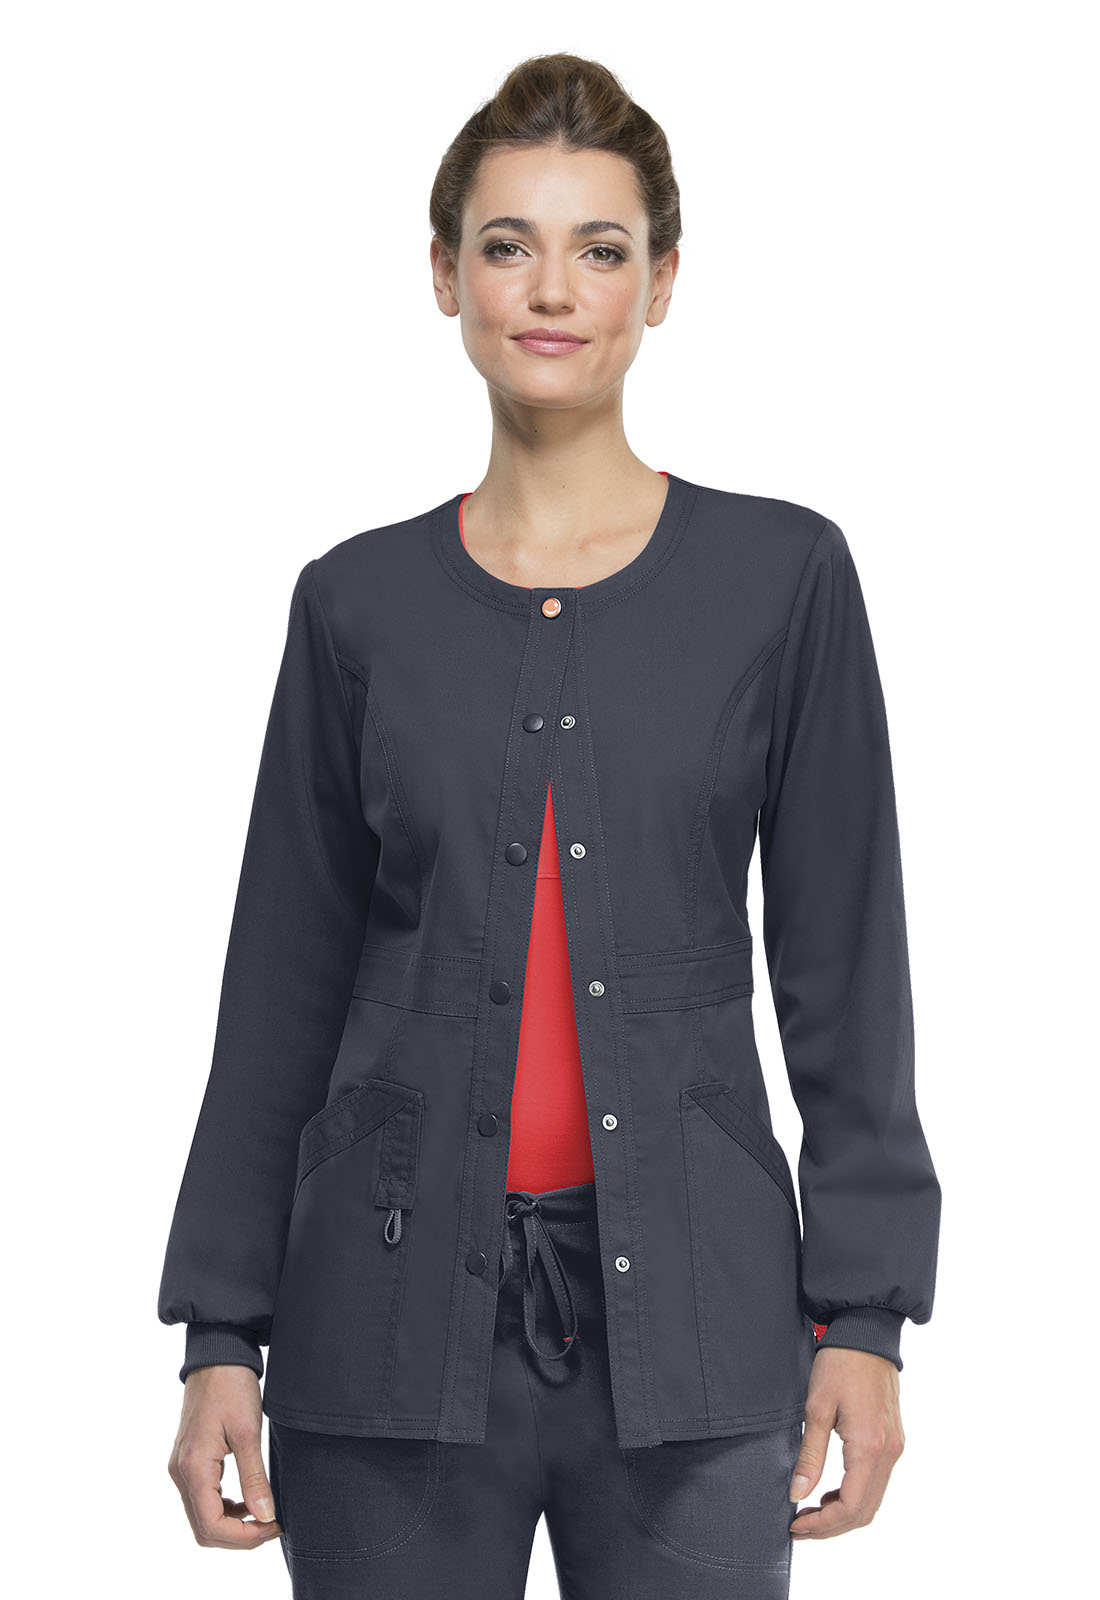 Code Happy Medical Bliss w/ Certainty Plus 46300AB Snap Front Warm-up Jacket-Code Happy